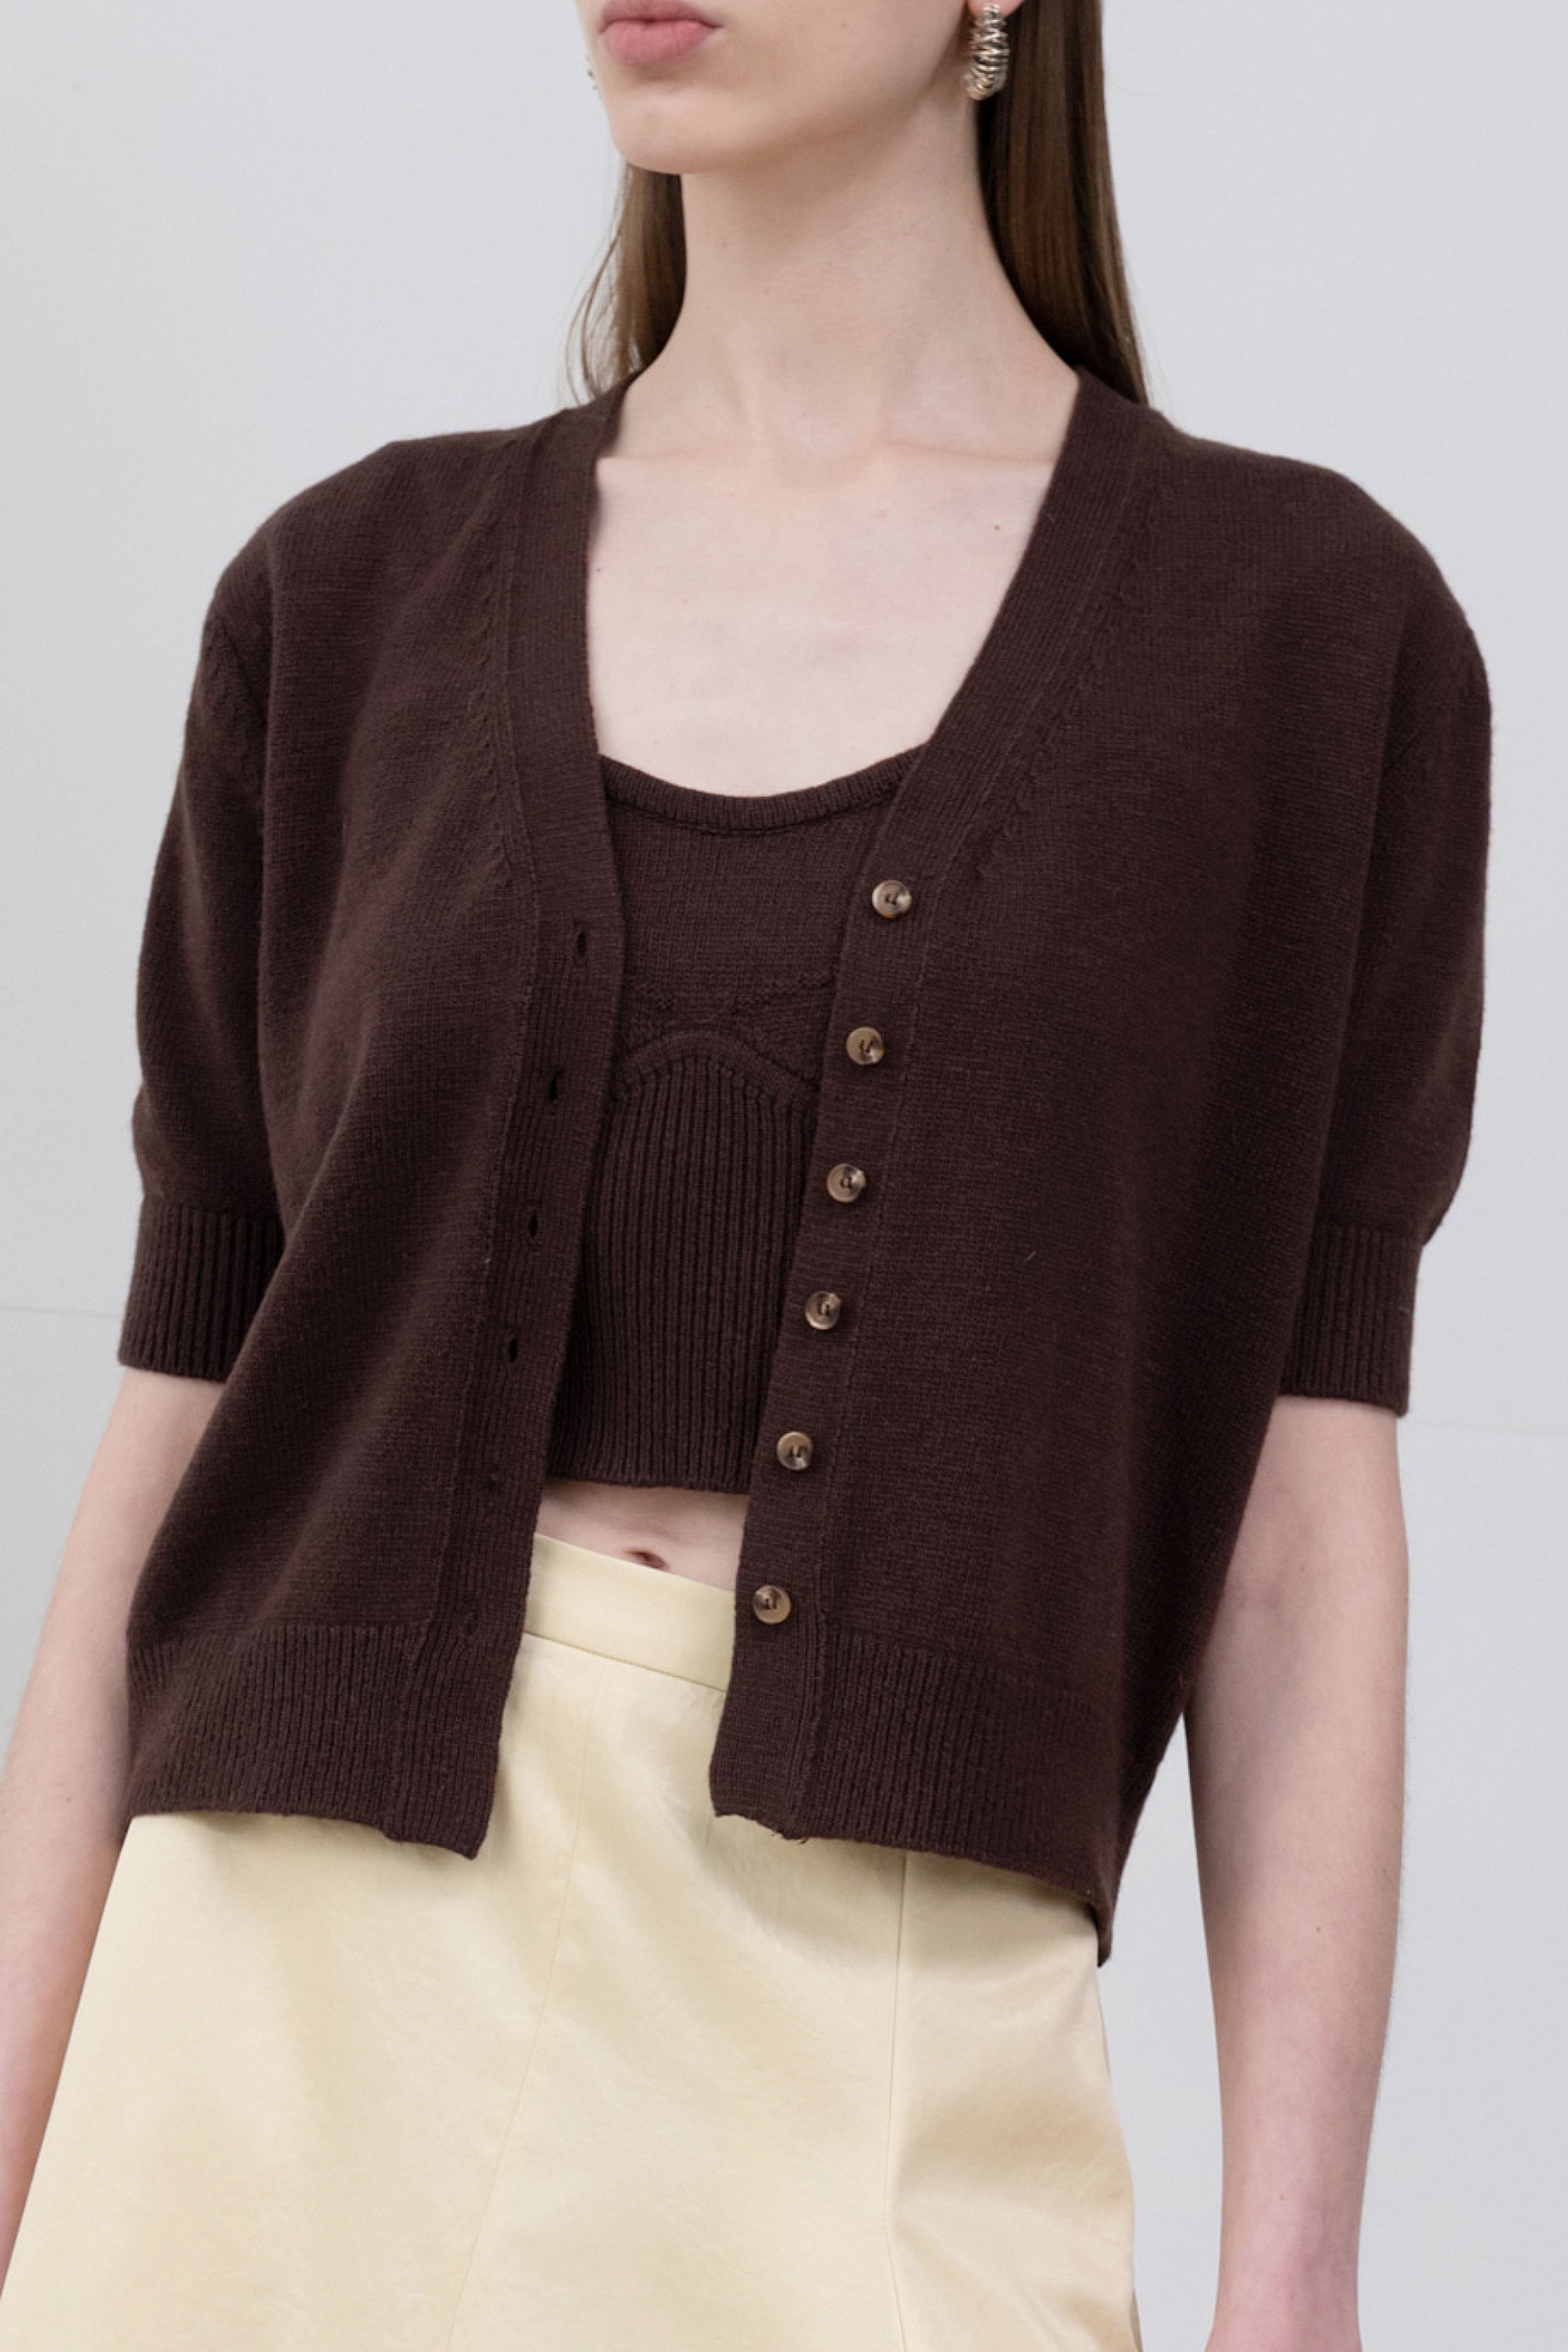 HIGH QUALITY LINE - KNIT BRALETTE AND CARDIGAN SET (BROWN)